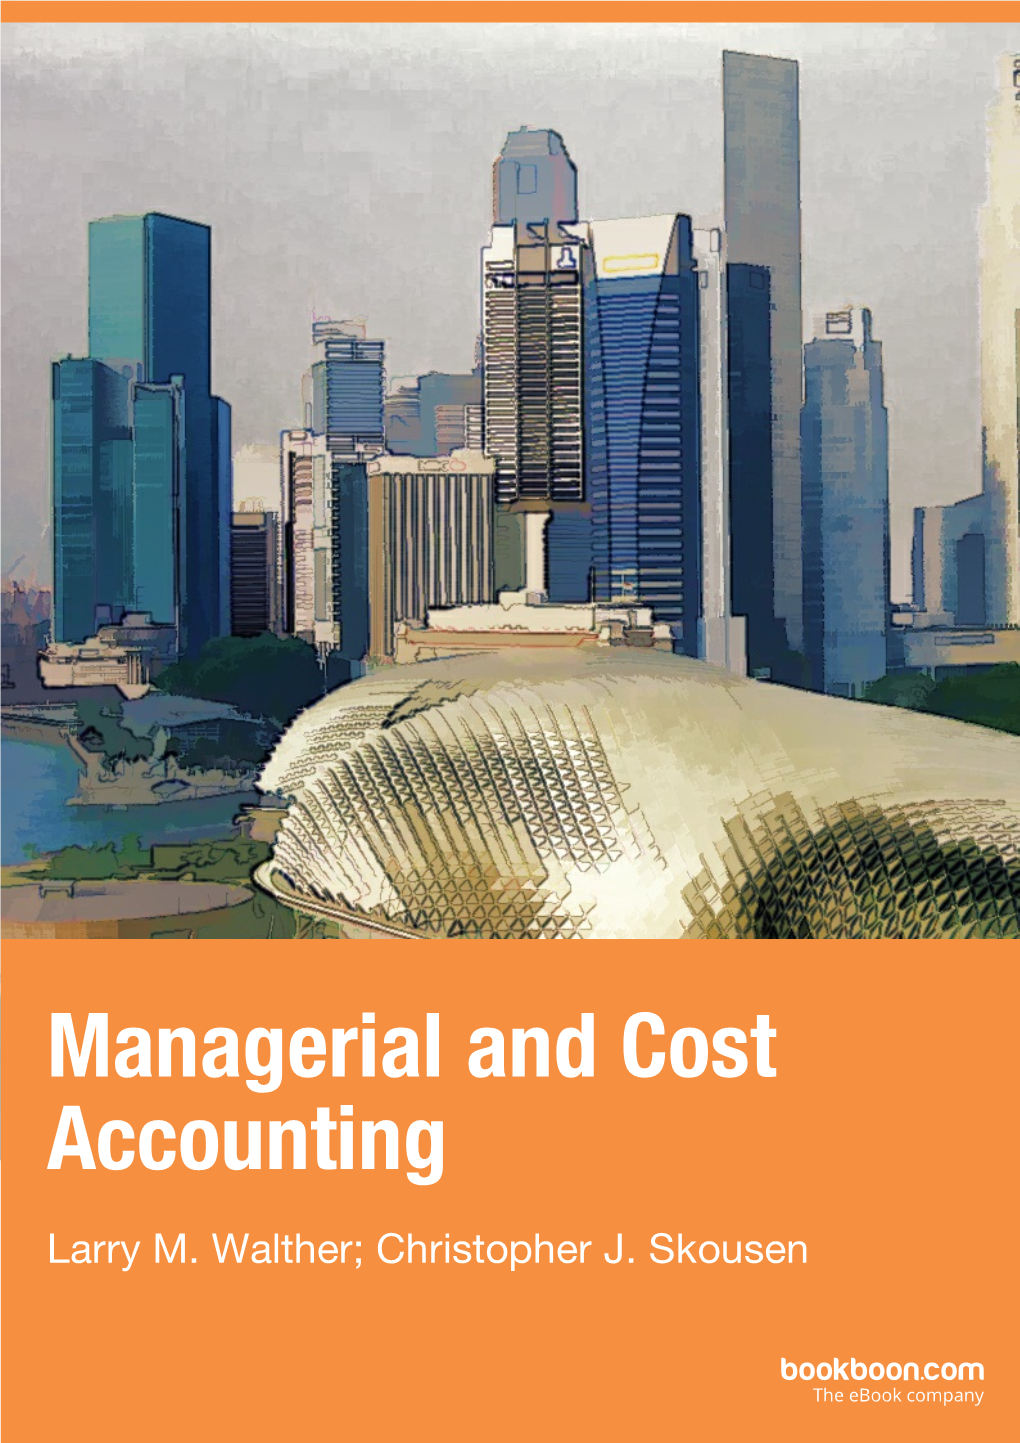 Managerial and Cost Accounting.Indd